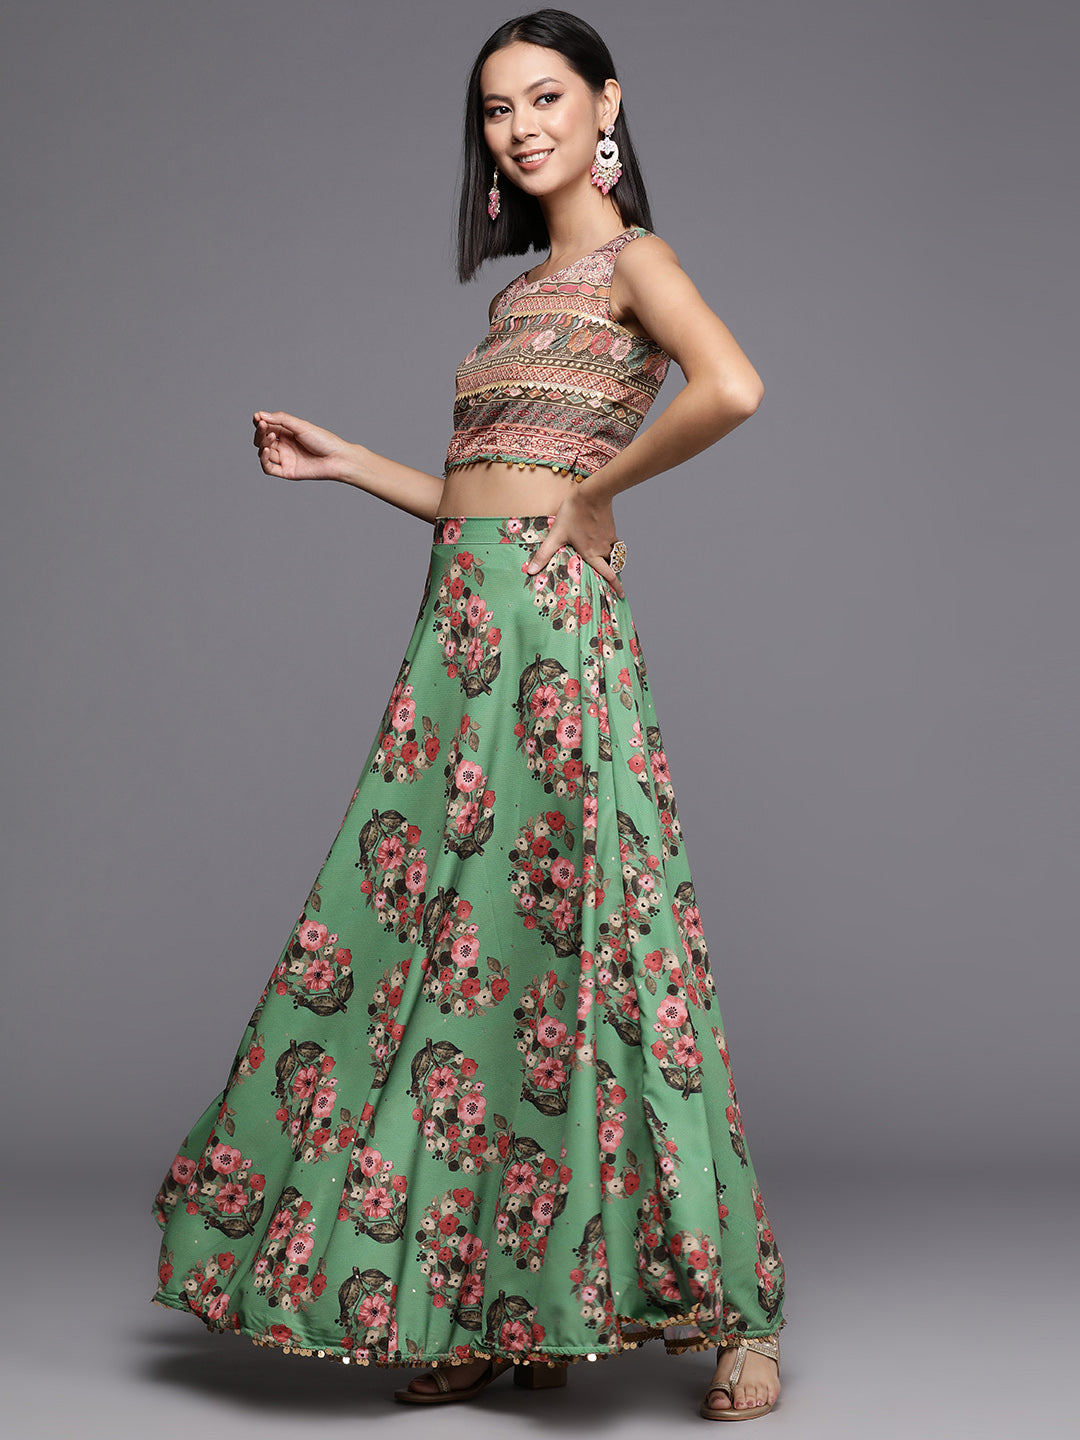 Green Floral Printed Ready to Wear Lehenga & Blouse With Dupatta